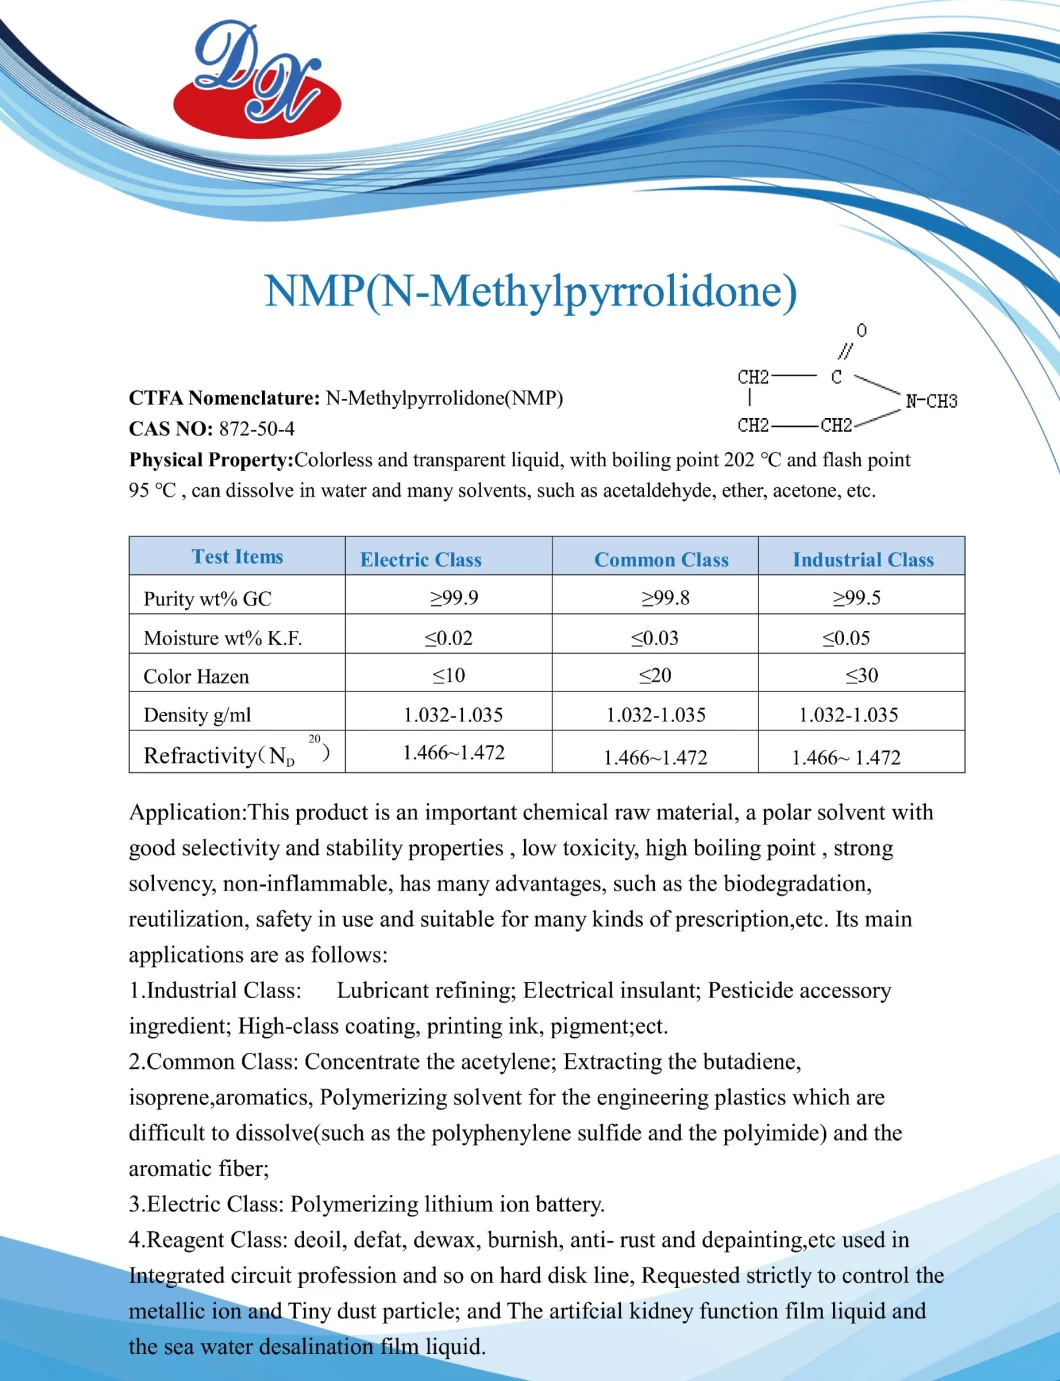 NMP for Auxiliary Materials of Lithium Ion Battery Electrode